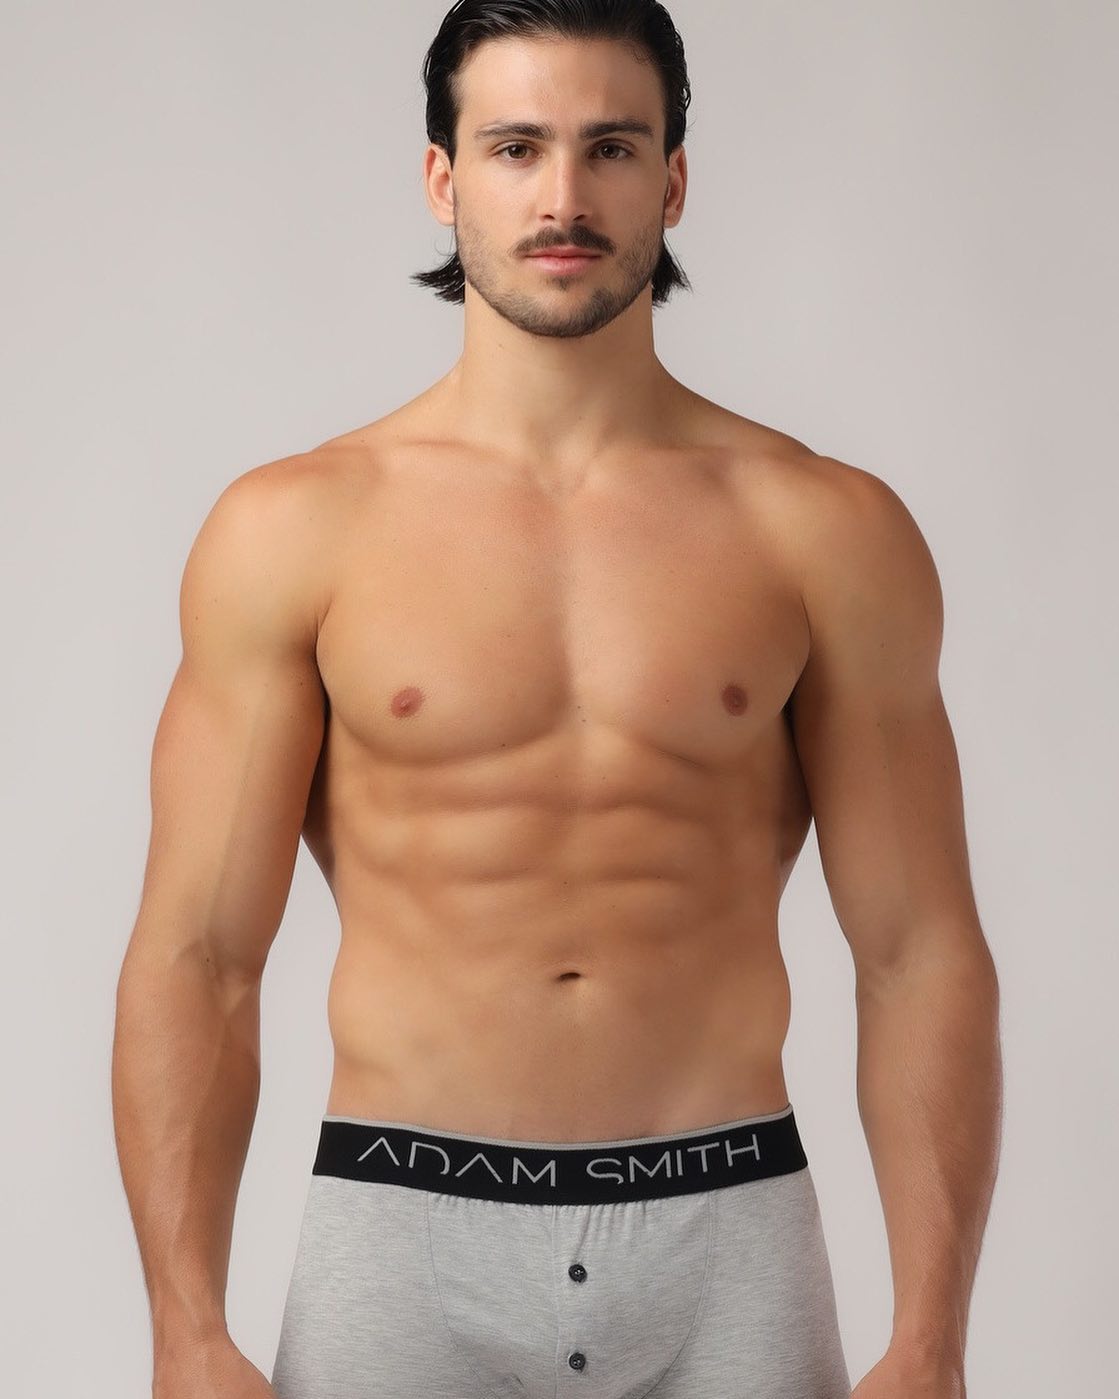 Looking for a pair of trunks with buttons? Check out the Button Front Boxer Trunks from AdamSmithWear, a beautiful pair of low-rise trunks with a functional button front fly:
____
https://menandunderwear.com/shop/underwear/adam-smith-button-front-boxer-trunks-grey